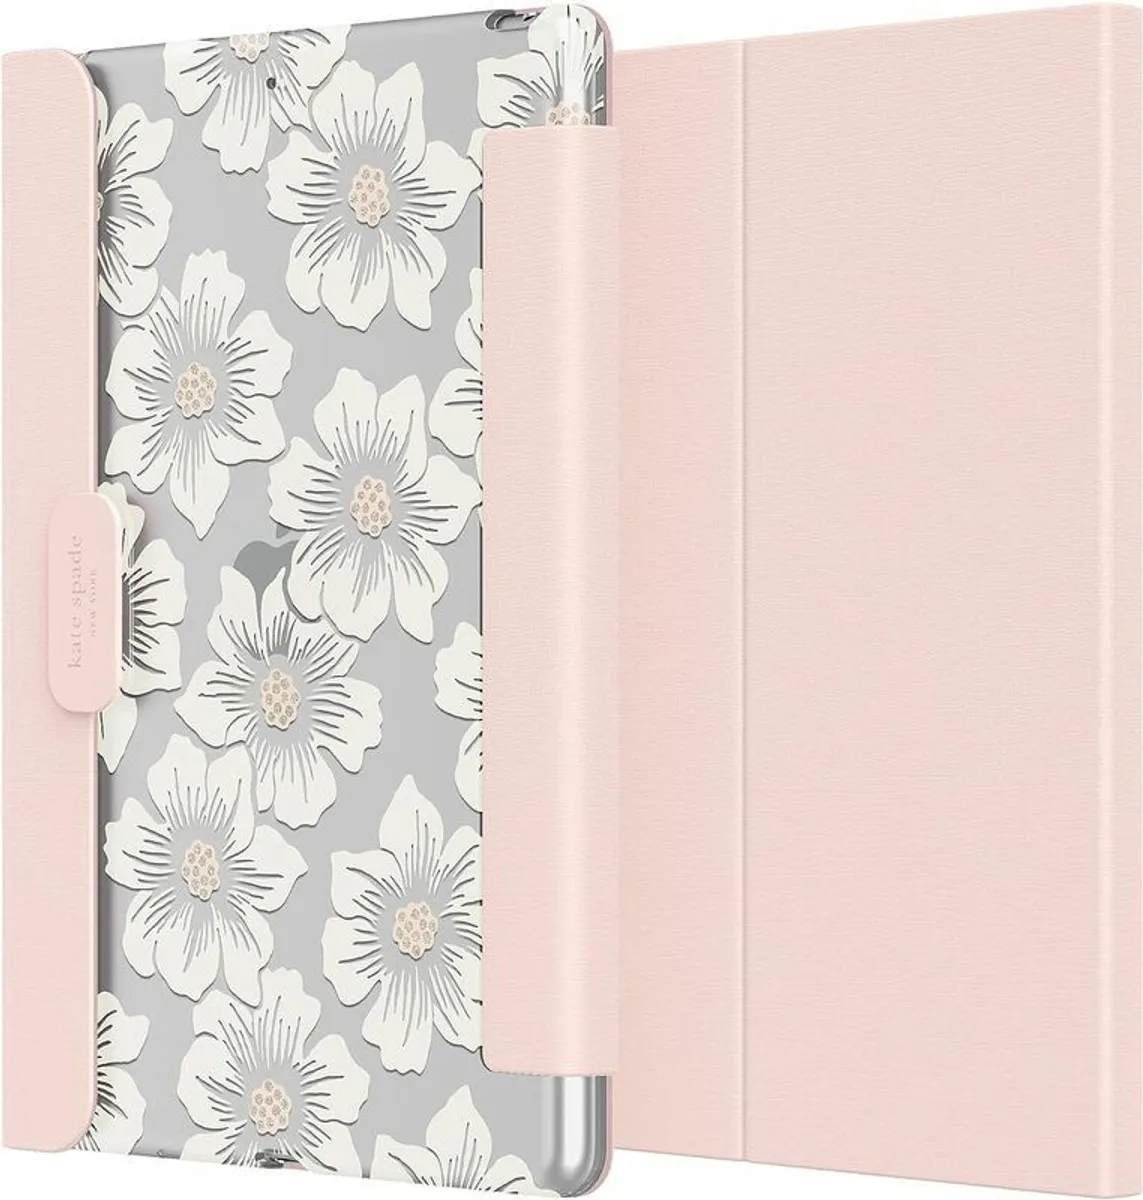 kate spade new york protective folio case for iPad 10.2-inch (9th, 8th and 7th Gen) | - Image 1